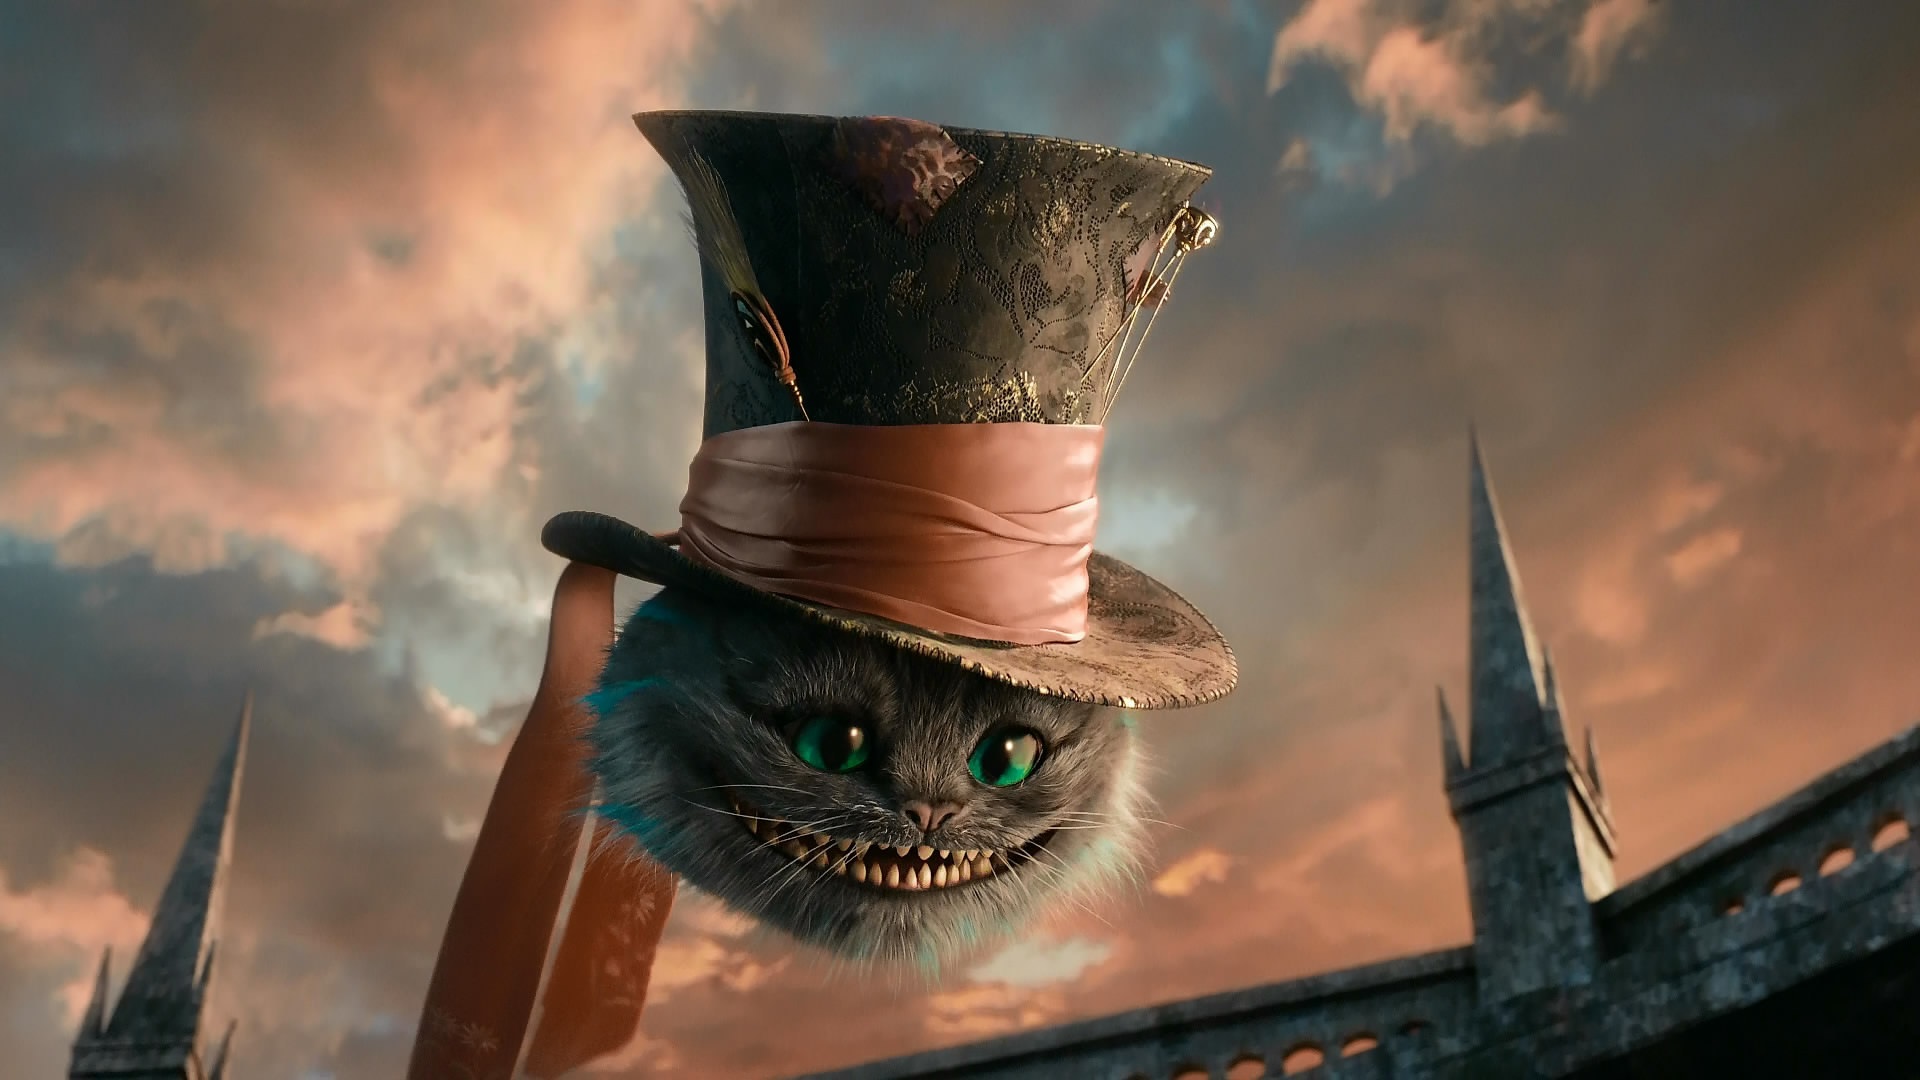 Download wallpaper for 3840x2400 resolution | Cheshire Cat, Alice in